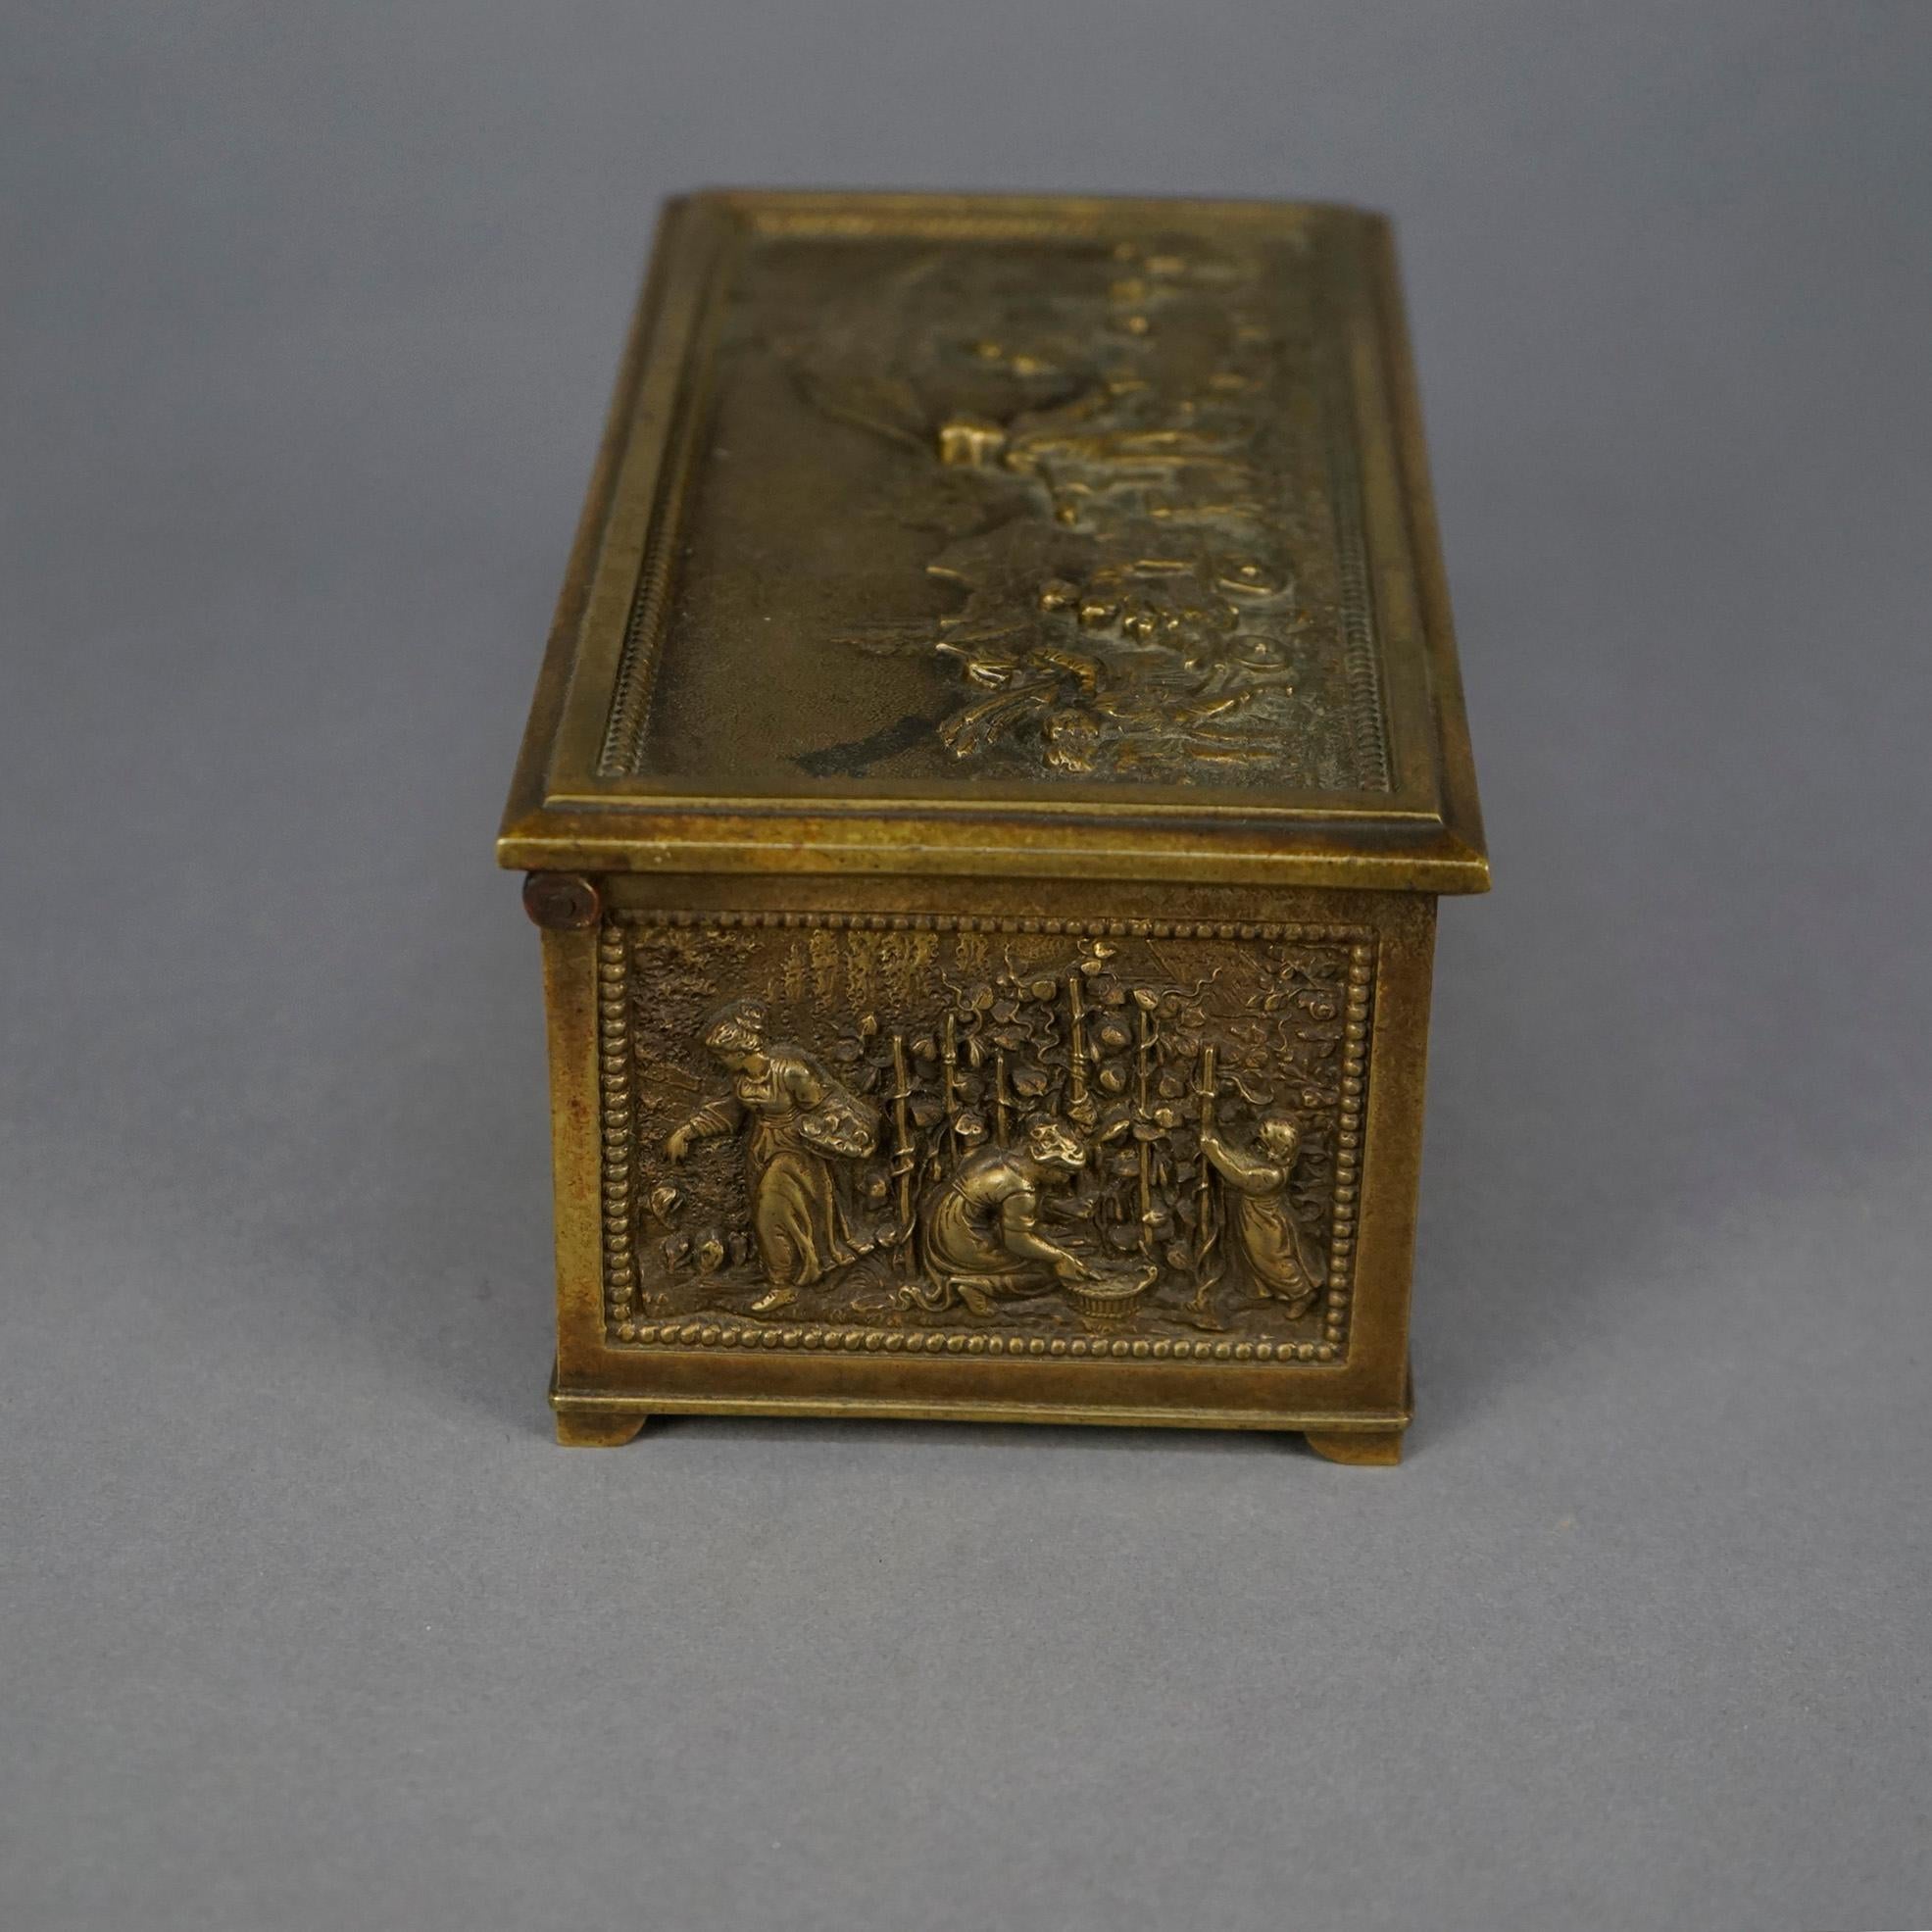 19th Century Antique Bronze Box, Continental Genre Scene with Figures in High Relief 19th C